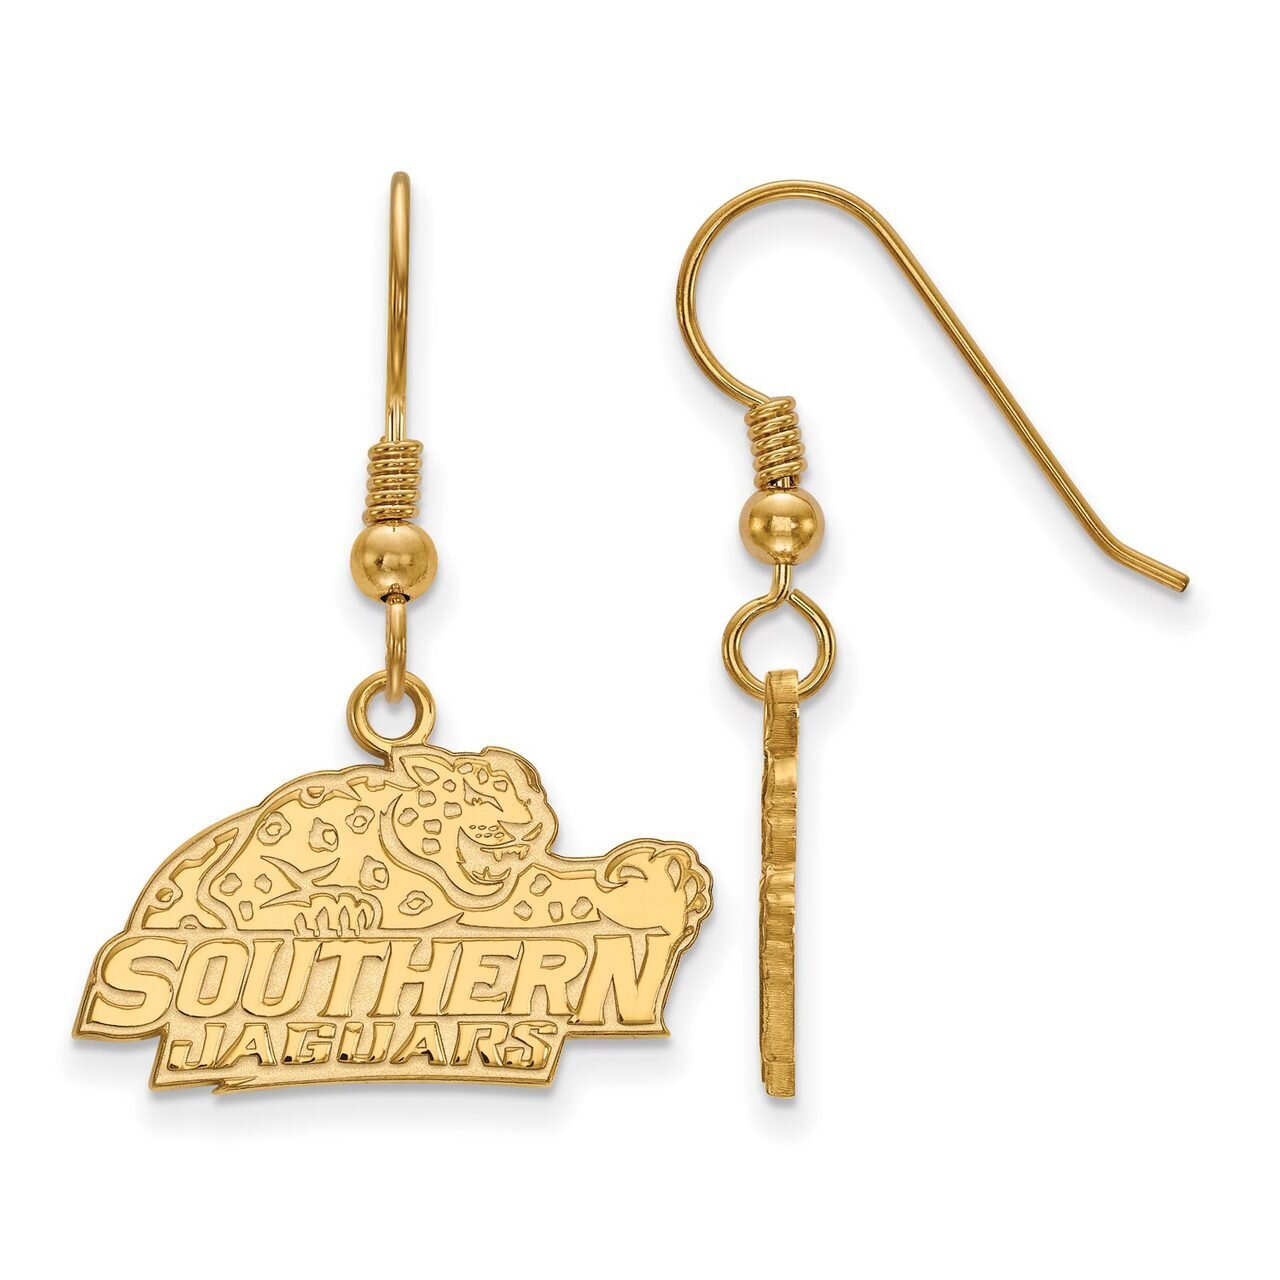 Southern University Small Dangle Earring Wire Gold-plated Silver GP003SAM